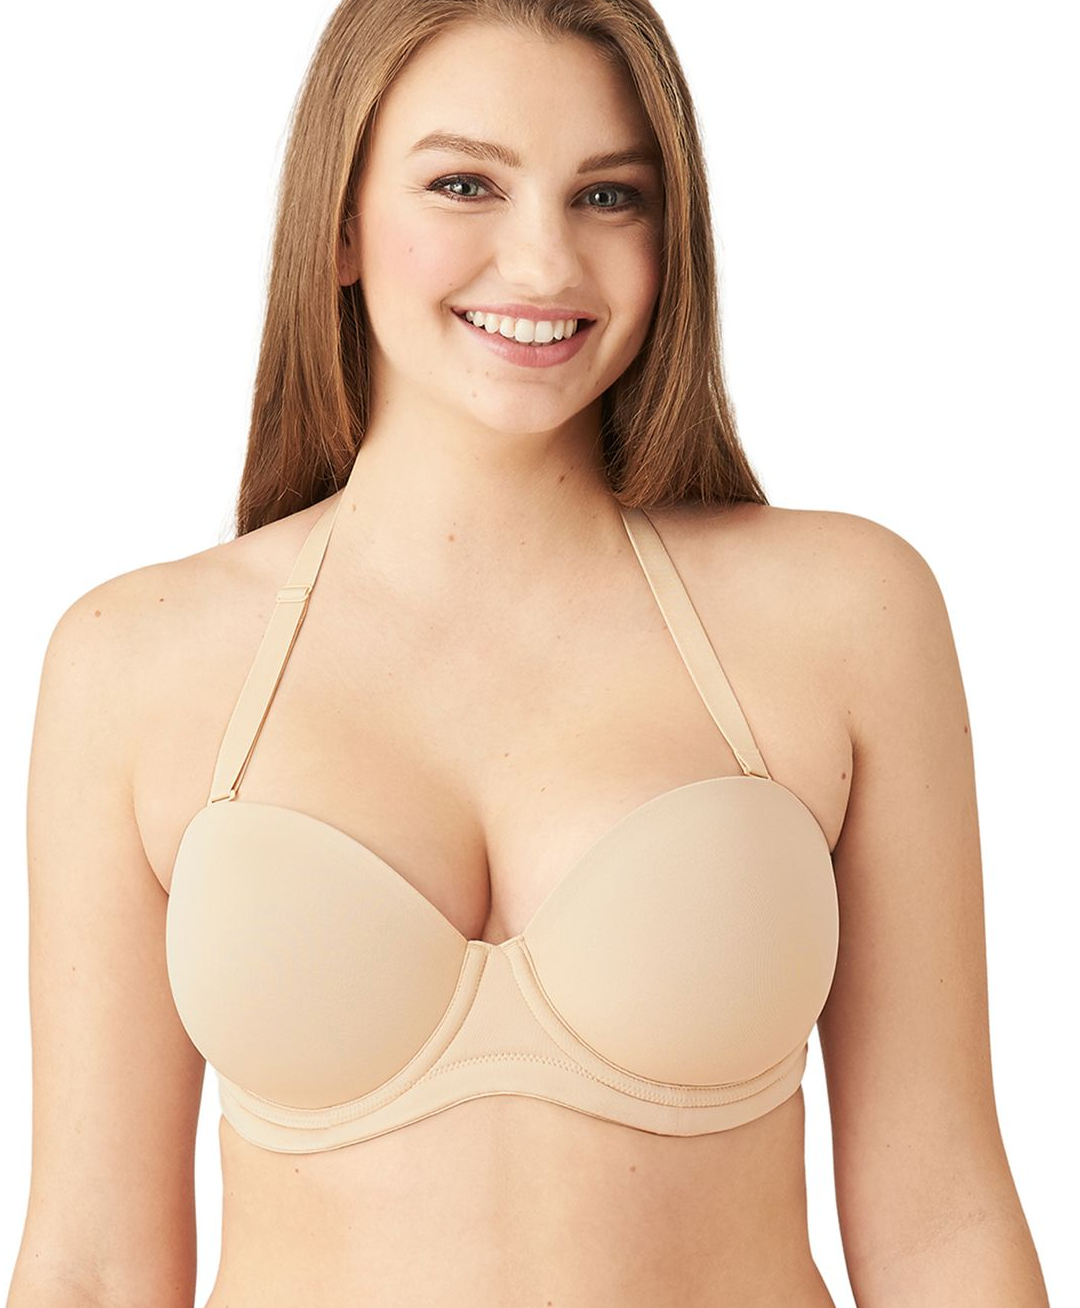  Womens Underwire Bandeau Minimizer Starpless Bras For Large  Bust Pale Nude 40D